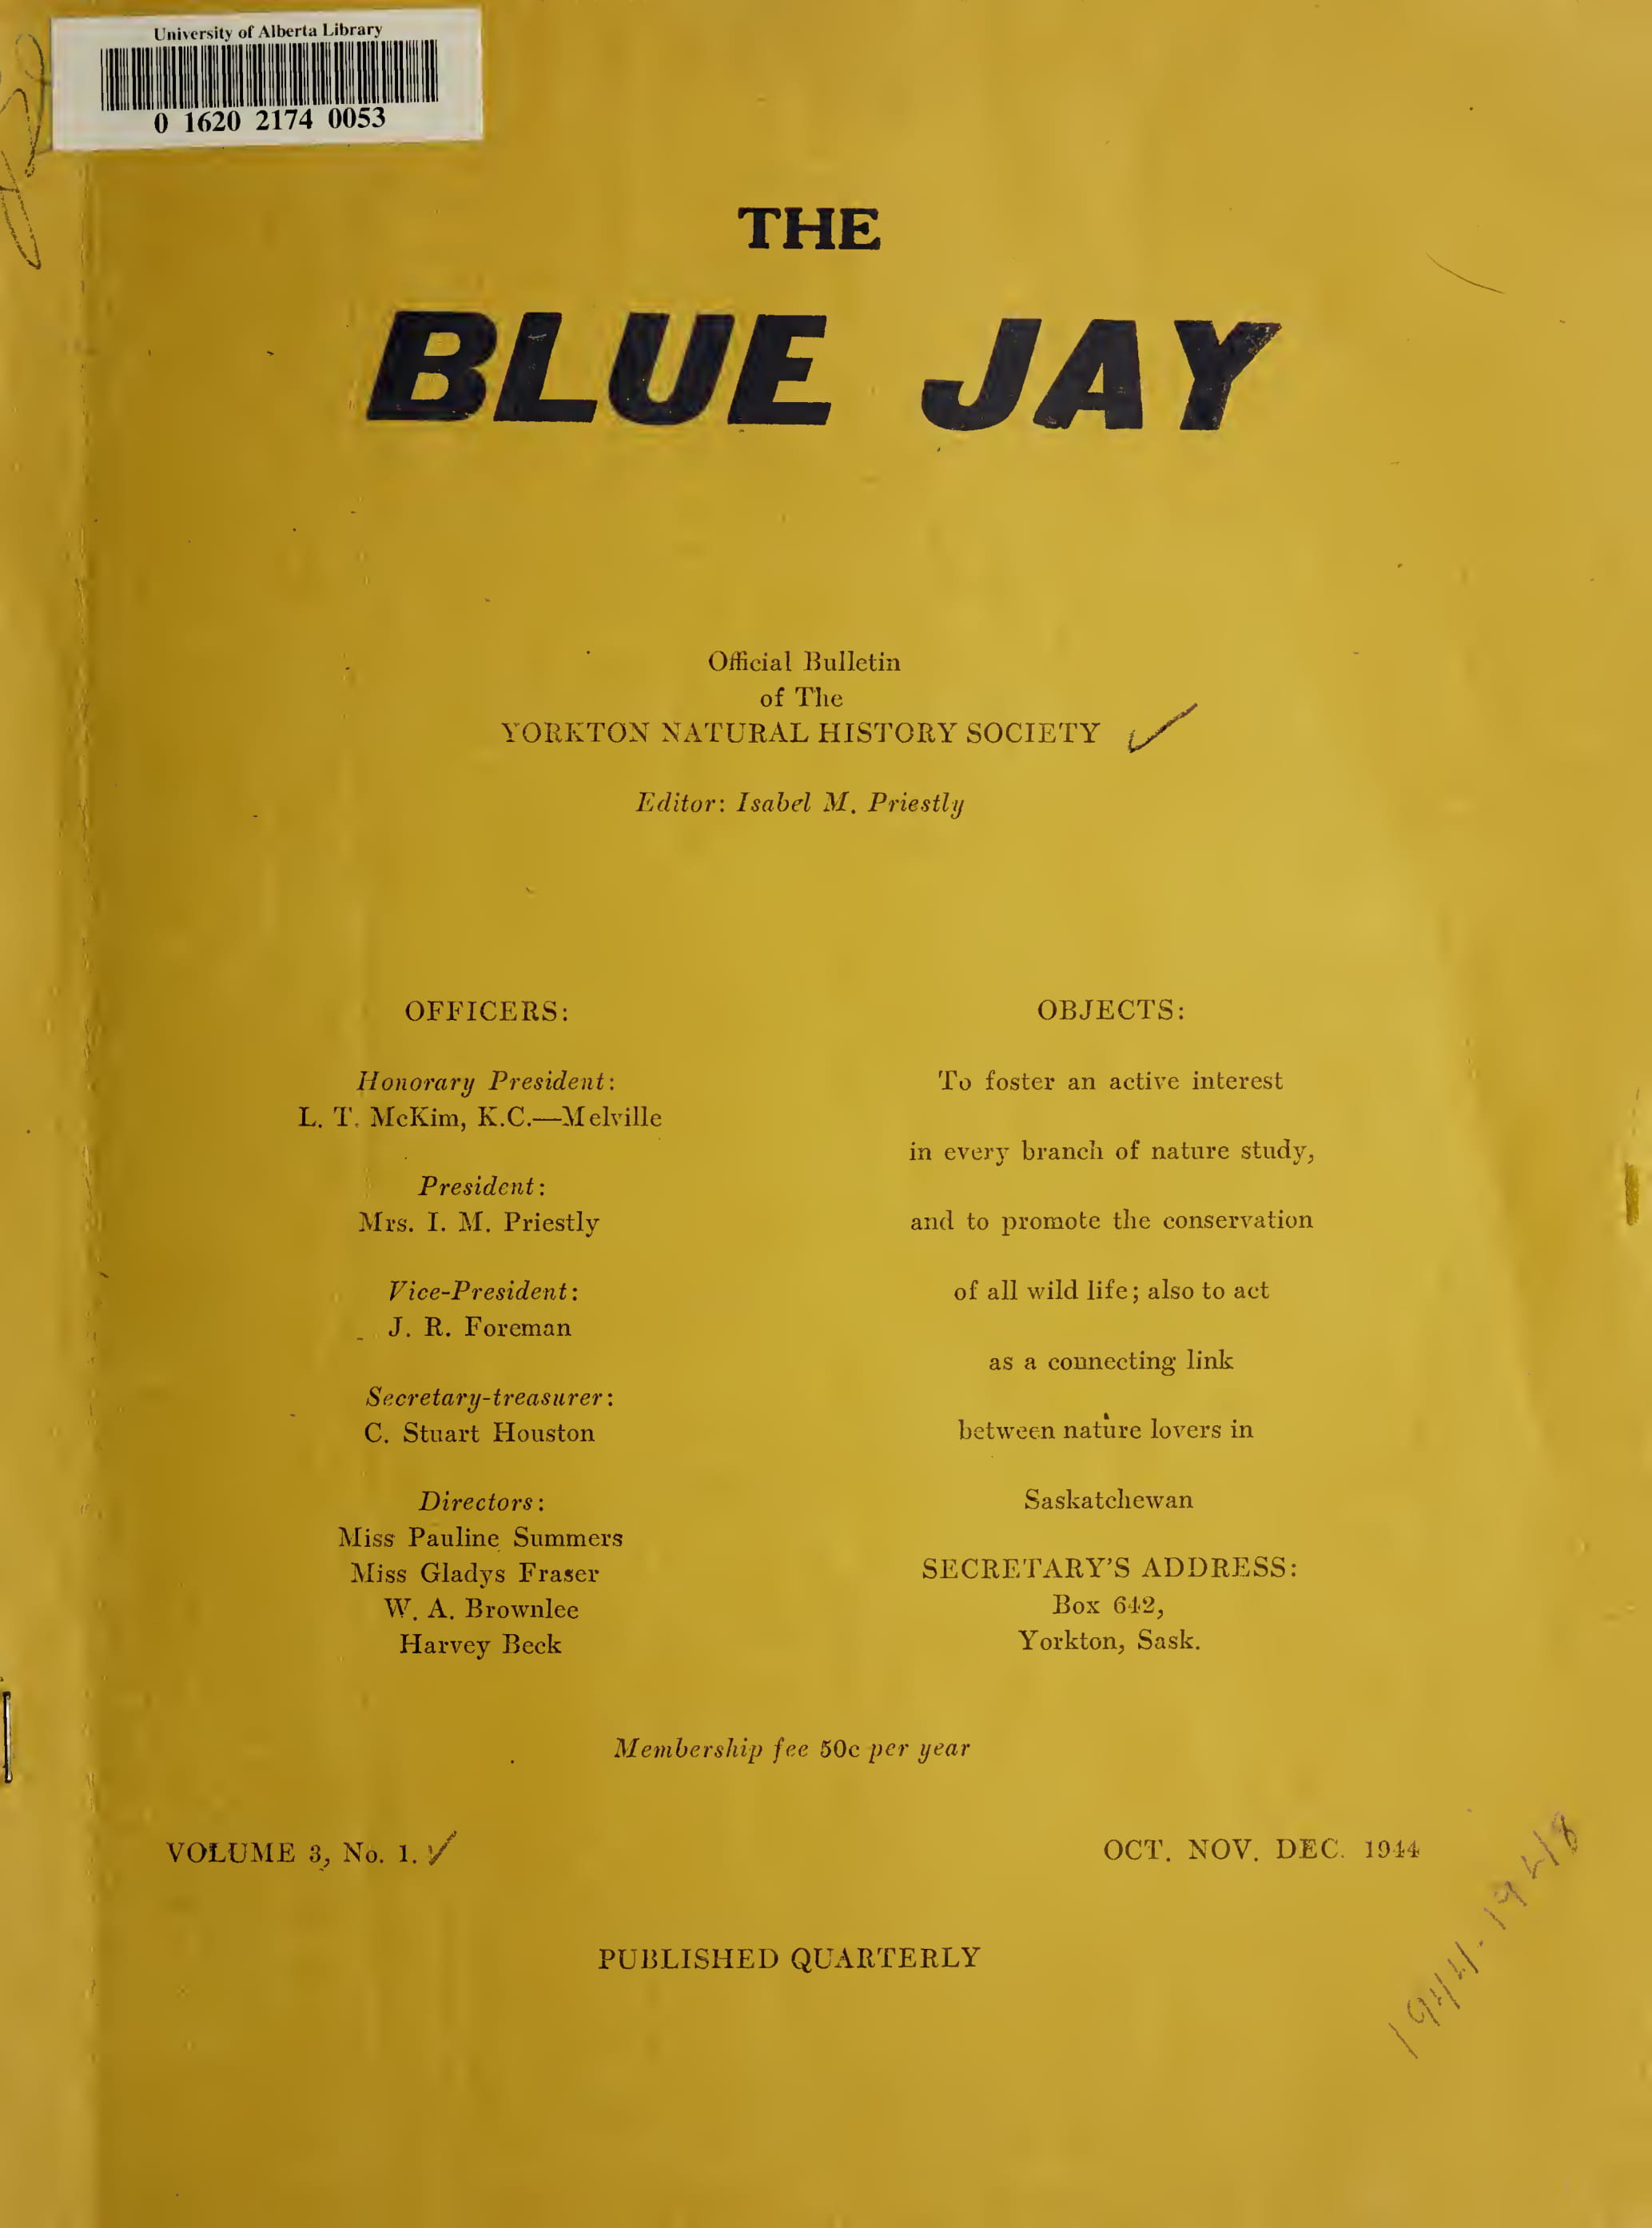 Cover Image for Fall 1944